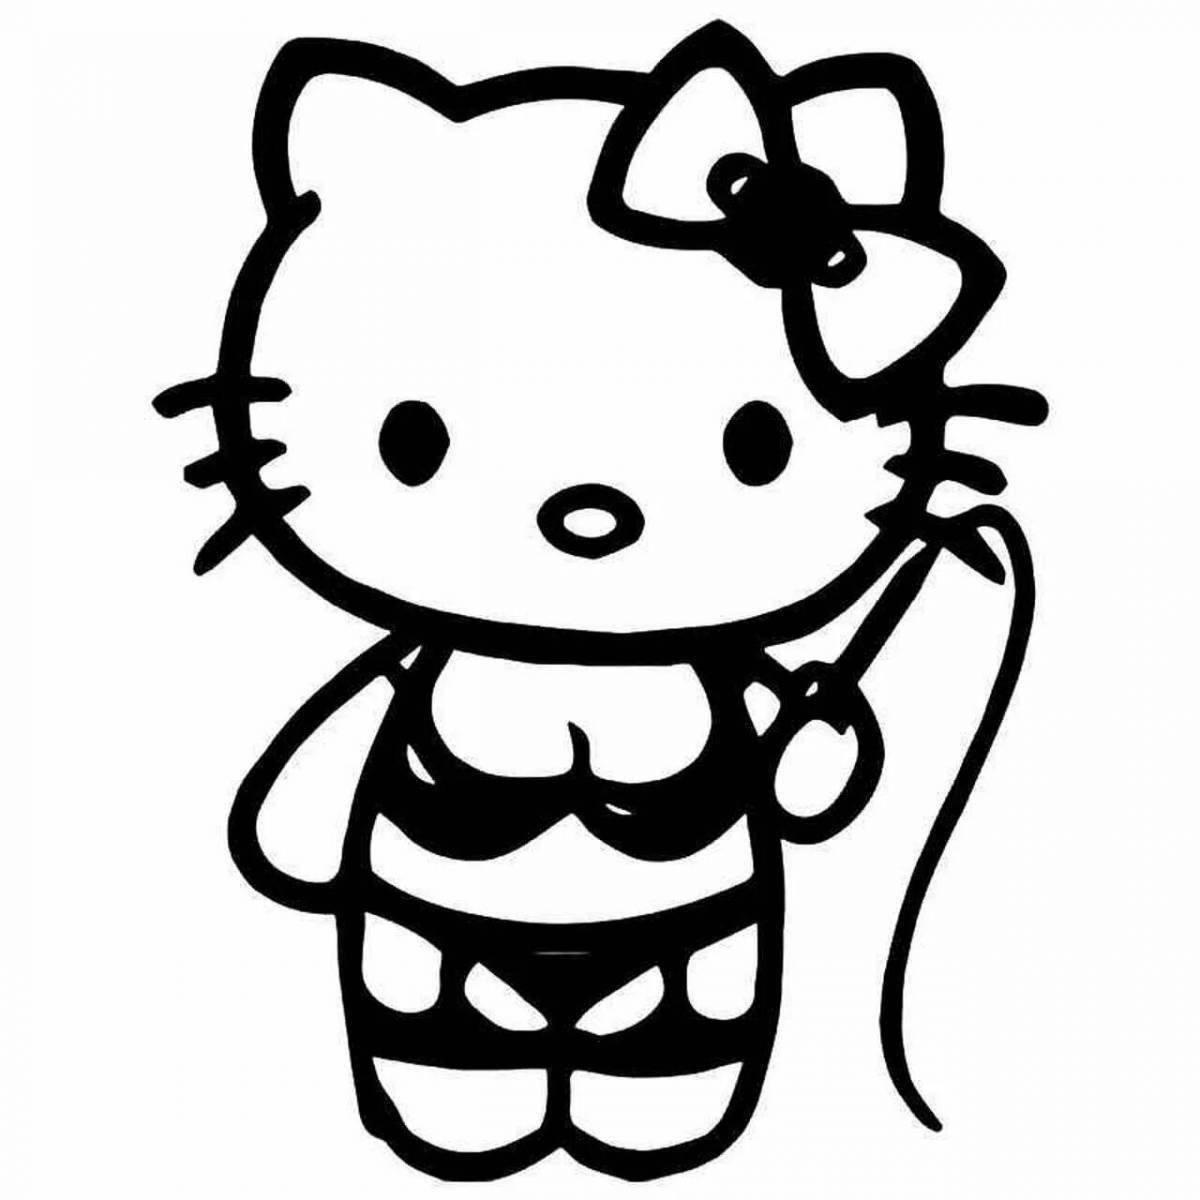 Bright coloring hello kitty black and white kuromi